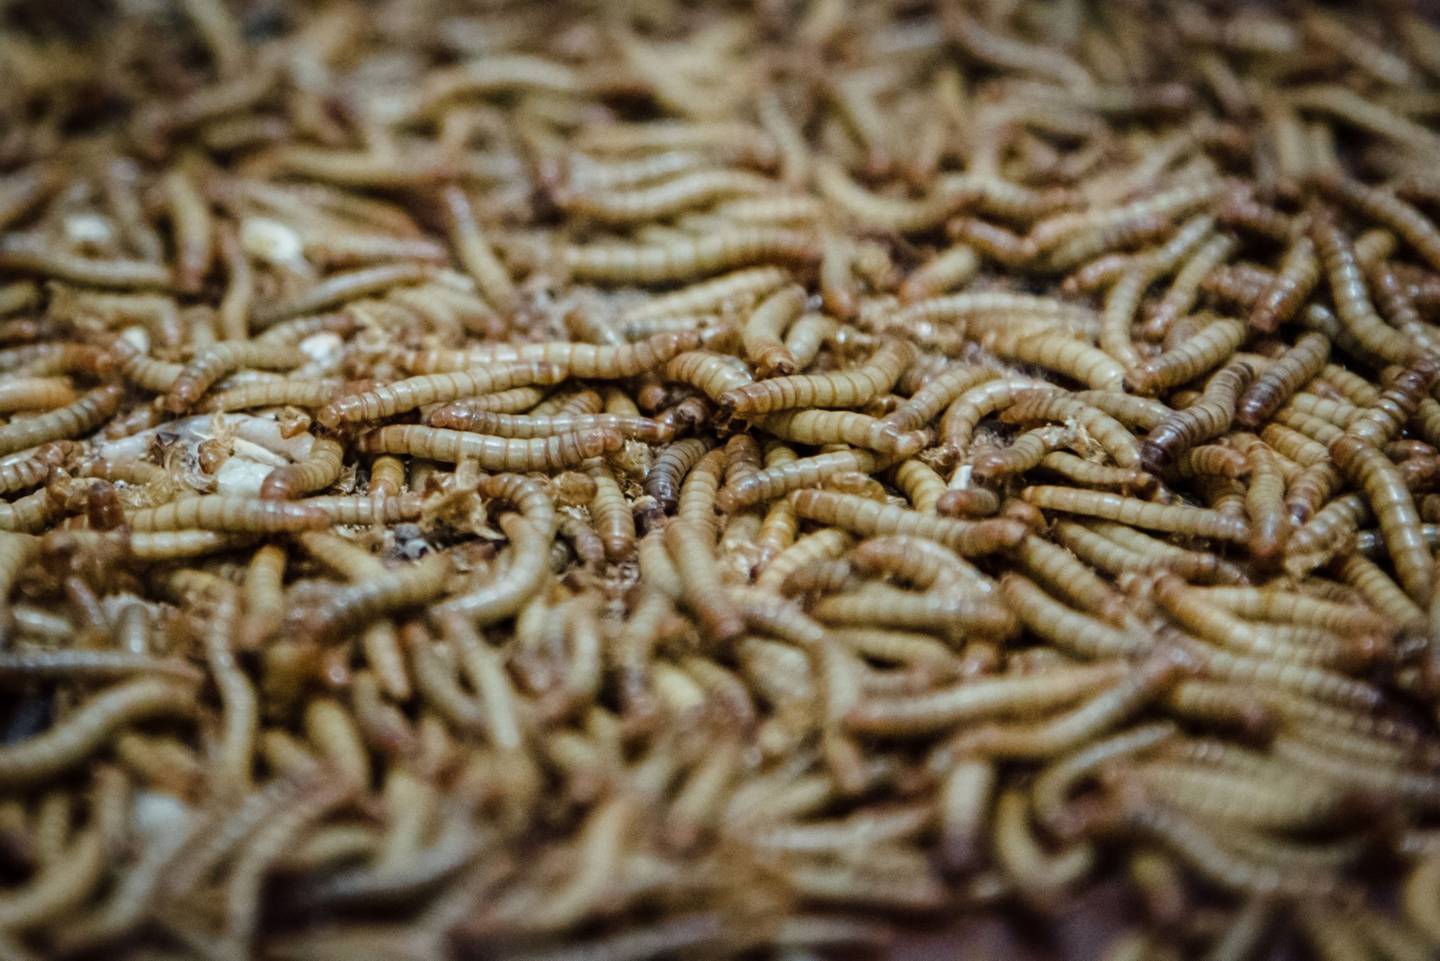 Mealworms.